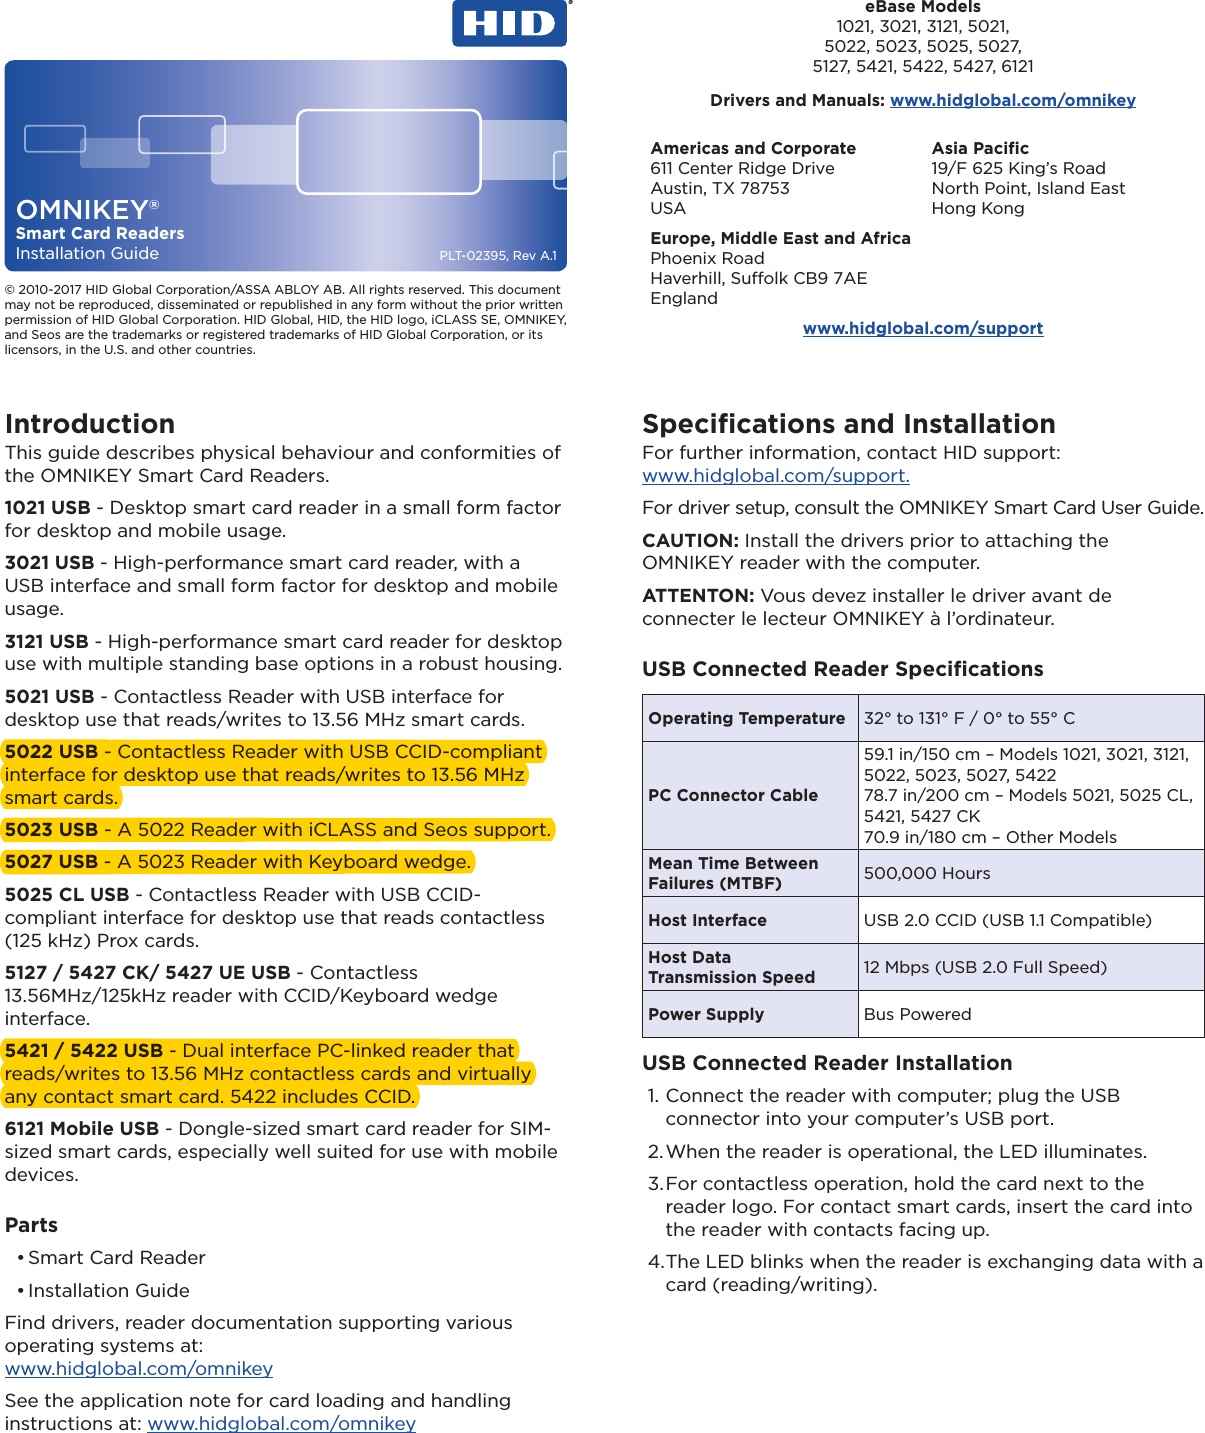  PLT-02395, Rev A.1OMNIKEY®Smart Card ReadersInstallation Guide© 2010-2017 HID Global Corporation/ASSA ABLOY AB. All rights reserved. This document may not be reproduced, disseminated or republished in any form without the prior written permission of HID Global Corporation. HID Global, HID, the HID logo, iCLASS SE, OMNIKEY, and Seos are the trademarks or registered trademarks of HID Global Corporation, or its licensors, in the U.S. and other countries.Americas and Corporate611 Center Ridge DriveAustin, TX 78753USAAsia Paciﬁc19/F 625 King’s RoadNorth Point, Island EastHong KongEurope, Middle East and AfricaPhoenix RoadHaverhill, Suolk CB9 7AEEnglandwww.hidglobal.com/supporteBase Models1021, 3021, 3121, 5021,5022, 5023, 5025, 5027,5127, 5421, 5422, 5427, 6121Drivers and Manuals: www.hidglobal.com/omnikeyIntroductionThis guide describes physical behaviour and conformities of the OMNIKEY Smart Card Readers.1021 USB - Desktop smart card reader in a small form factor for desktop and mobile usage.3021 USB - High-performance smart card reader, with a USB interface and small form factor for desktop and mobile usage.3121 USB - High-performance smart card reader for desktop use with multiple standing base options in a robust housing.5021 USB - Contactless Reader with USB interface for desktop use that reads/writes to 13.56 MHz smart cards.5022 USB - Contactless Reader with USB CCID-compliant interface for desktop use that reads/writes to 13.56 MHz smart cards.5023 USB - A 5022 Reader with iCLASS and Seos support.5027 USB - A 5023 Reader with Keyboard wedge.5025 CL USB - Contactless Reader with USB CCID-compliant interface for desktop use that reads contactless (125 kHz) Prox cards.5127 / 5427 CK/ 5427 UE USB - Contactless 13.56MHz/125kHz reader with CCID/Keyboard wedge interface.5421 / 5422 USB - Dual interface PC-linked reader that reads/writes to 13.56 MHz contactless cards and virtually any contact smart card. 5422 includes CCID.6121 Mobile USB - Dongle-sized smart card reader for SIM-sized smart cards, especially well suited for use with mobile devices.Parts• Smart Card Reader• Installation GuideFind drivers, reader documentation supporting various operating systems at:  www.hidglobal.com/omnikeySee the application note for card loading and handling instructions at: www.hidglobal.com/omnikeySpeciﬁcations and InstallationFor further information, contact HID support:  www.hidglobal.com/support.For driver setup, consult the OMNIKEY Smart Card User Guide.CAUTION: Install the drivers prior to attaching the OMNIKEY reader with the computer.ATTENTON: Vous devez installer le driver avant de connecter le lecteur OMNIKEY à l’ordinateur.USB Connected Reader SpeciﬁcationsOperating Temperature 32° to 131° F / 0° to 55° C PC Connector Cable59.1 in/150 cm – Models 1021, 3021, 3121, 5022, 5023, 5027, 542278.7 in/200 cm – Models 5021, 5025 CL, 5421, 5427 CK70.9 in/180 cm – Other ModelsMean Time Between Failures (MTBF) 500,000 HoursHost Interface USB 2.0 CCID (USB 1.1 Compatible)Host Data  Transmission Speed 12 Mbps (USB 2.0 Full Speed)Power Supply Bus PoweredUSB Connected Reader Installation1. Connect the reader with computer; plug the USB connector into your computer’s USB port.2. When the reader is operational, the LED illuminates.3. For contactless operation, hold the card next to the reader logo. For contact smart cards, insert the card into the reader with contacts facing up.4. The LED blinks when the reader is exchanging data with a card (reading/writing).